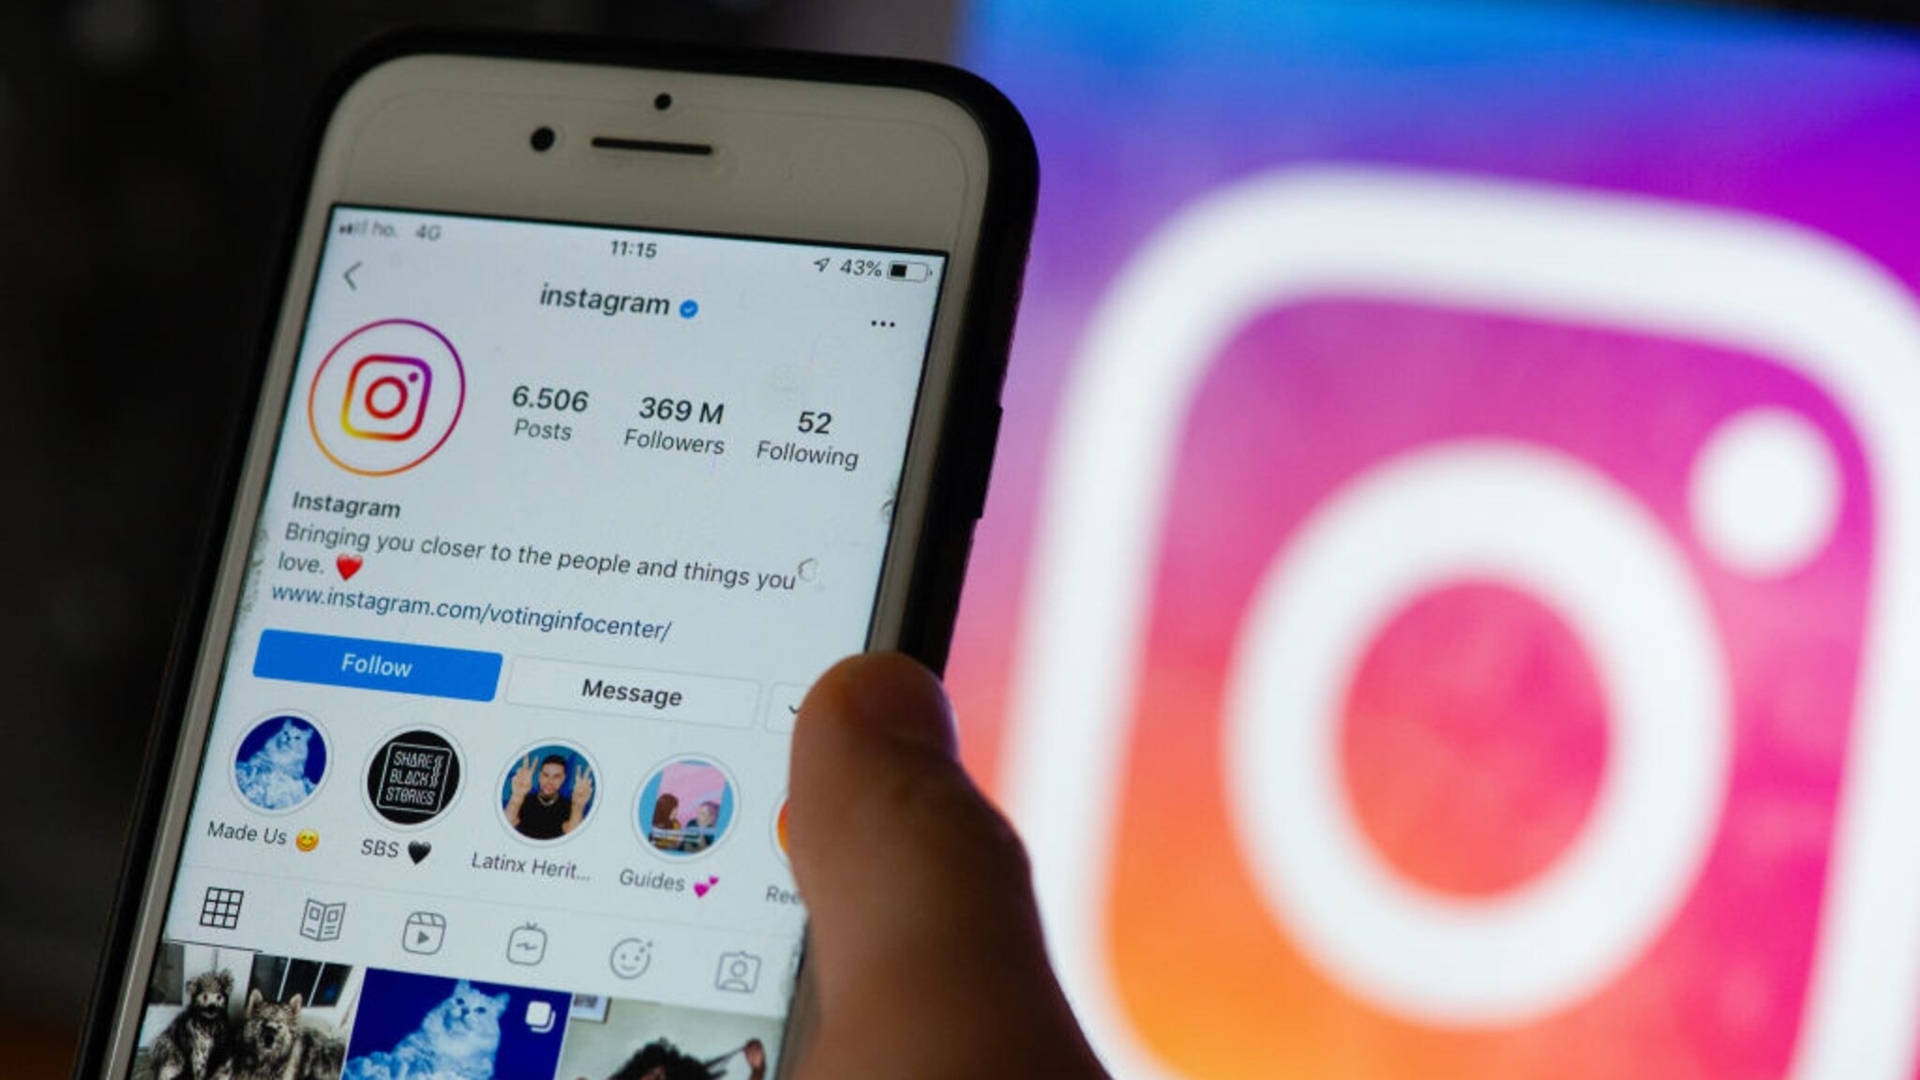 In this guide, we will go over how to hide followers list on Instagram, so you don't have to worry about people learning which accounts you have followed.